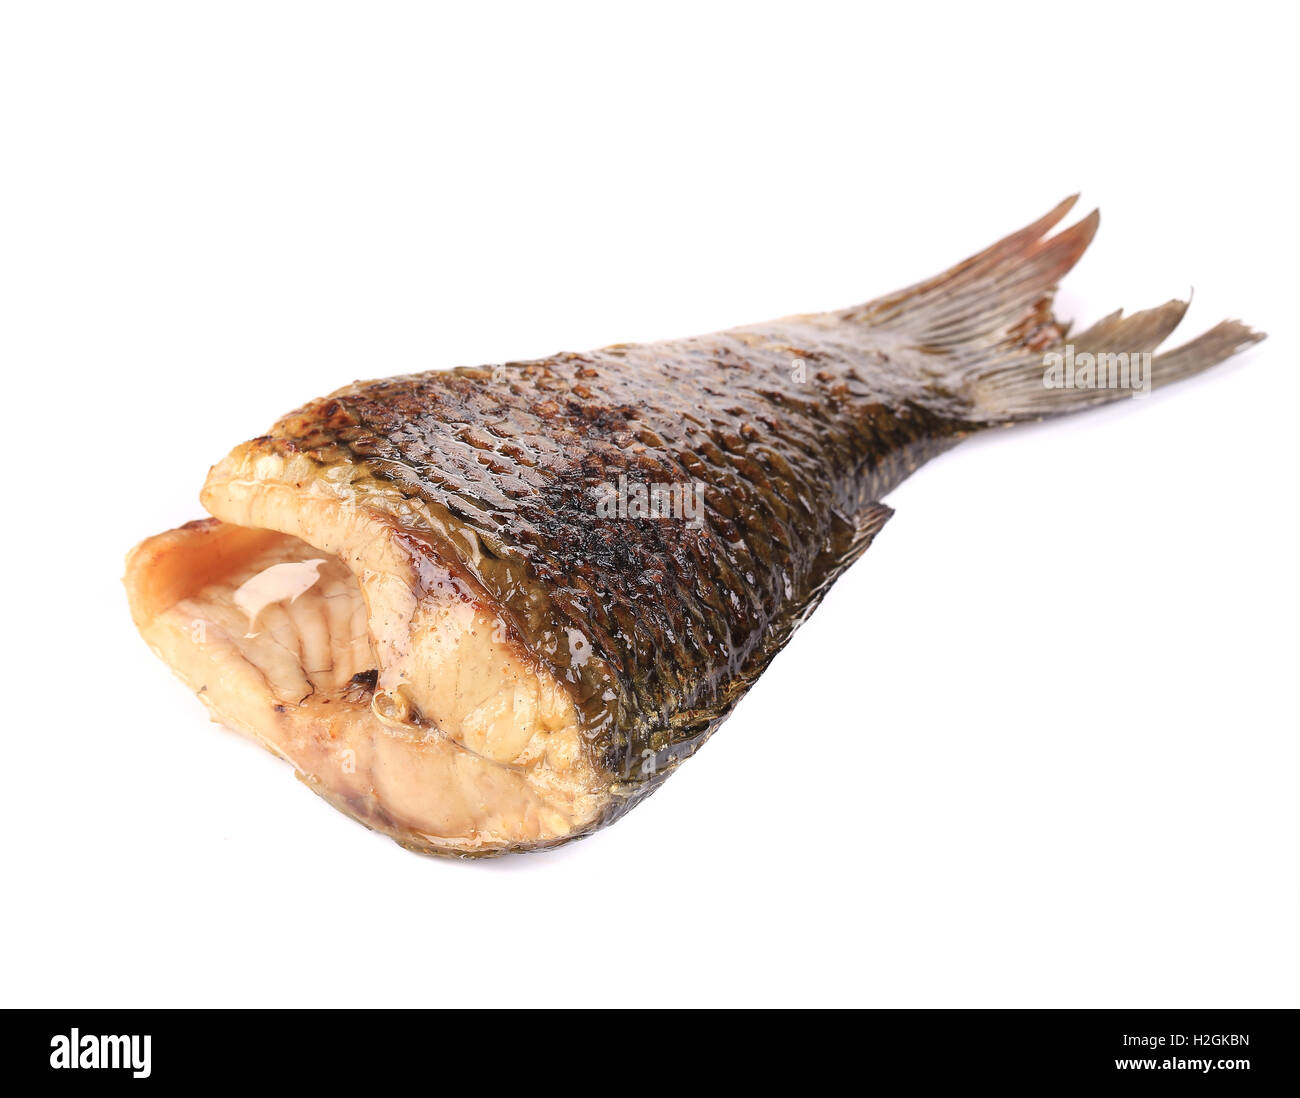 Grilled carp fish tail. Stock Photo